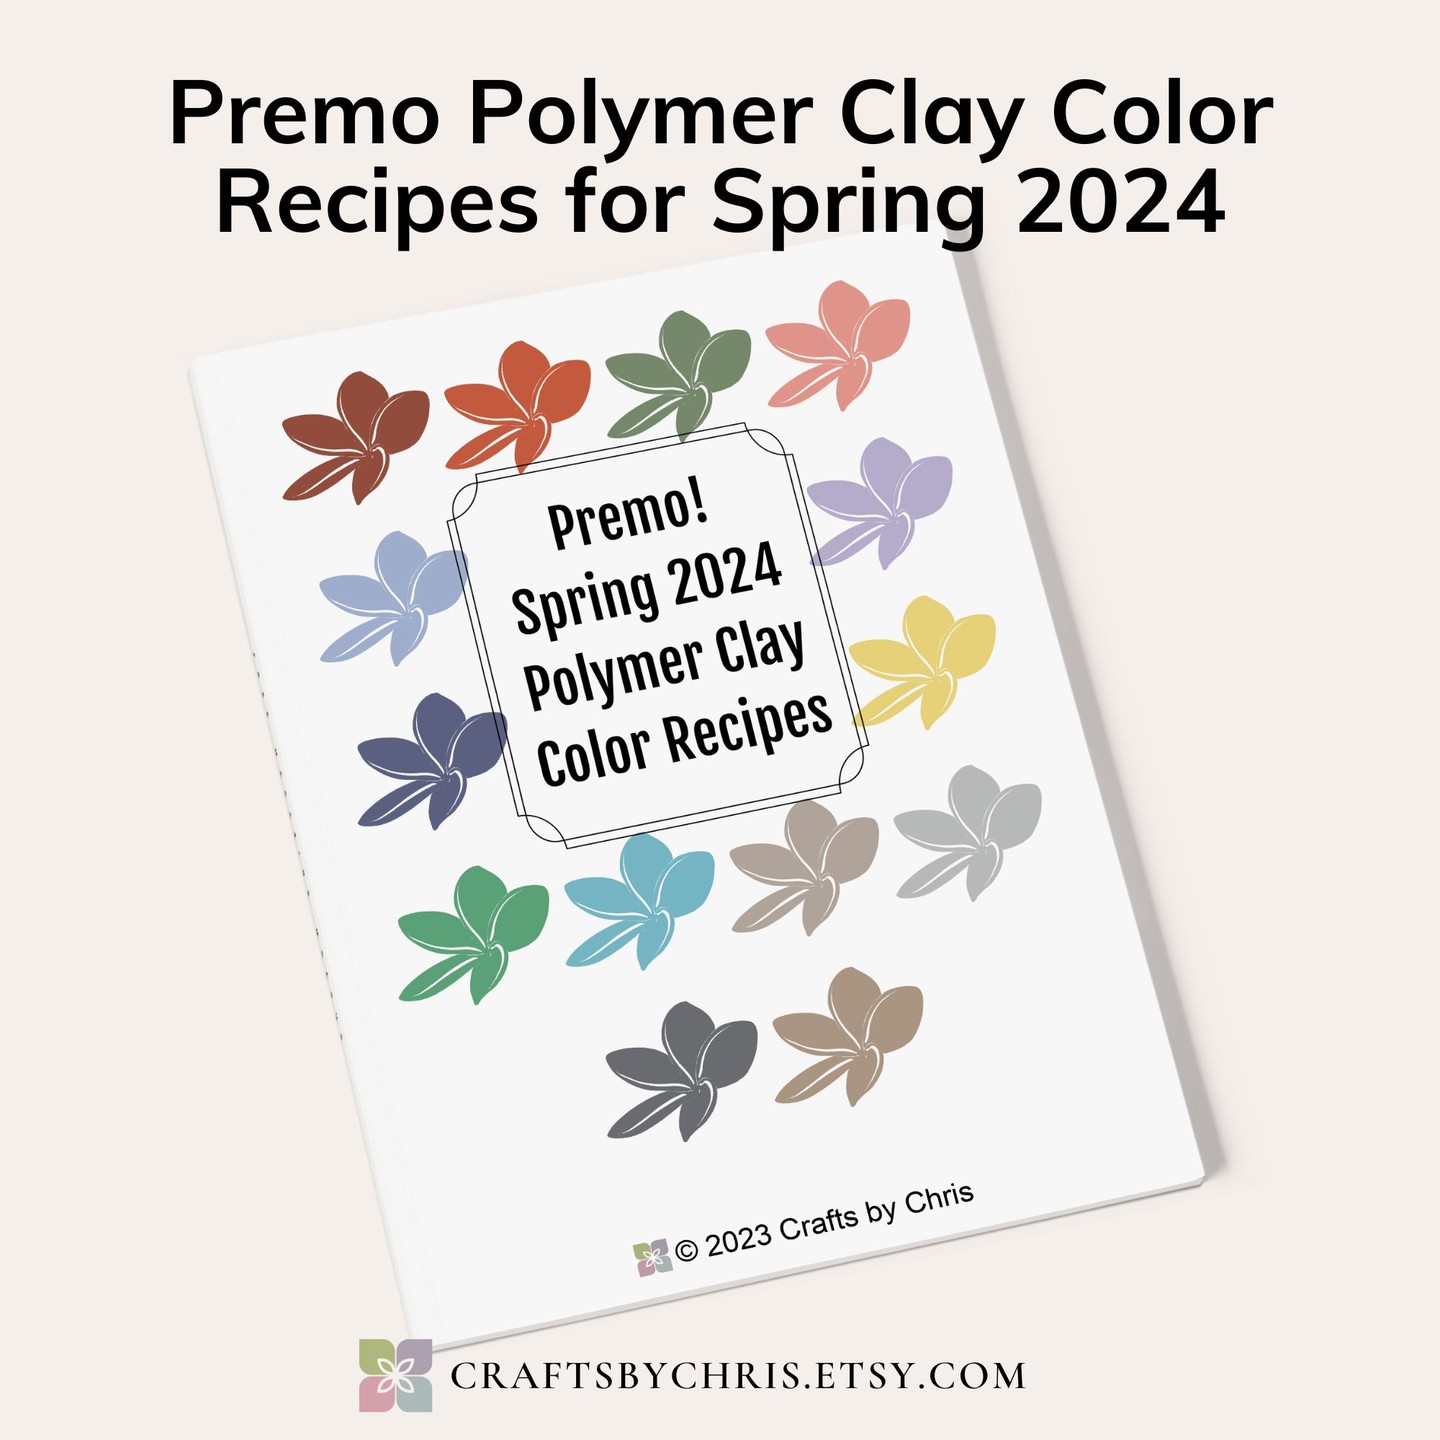 Premo Spring 2024 color recipes are now available. Link in bio

#polymerclaycolorrecipes #polymerclaycolormixing #polyme